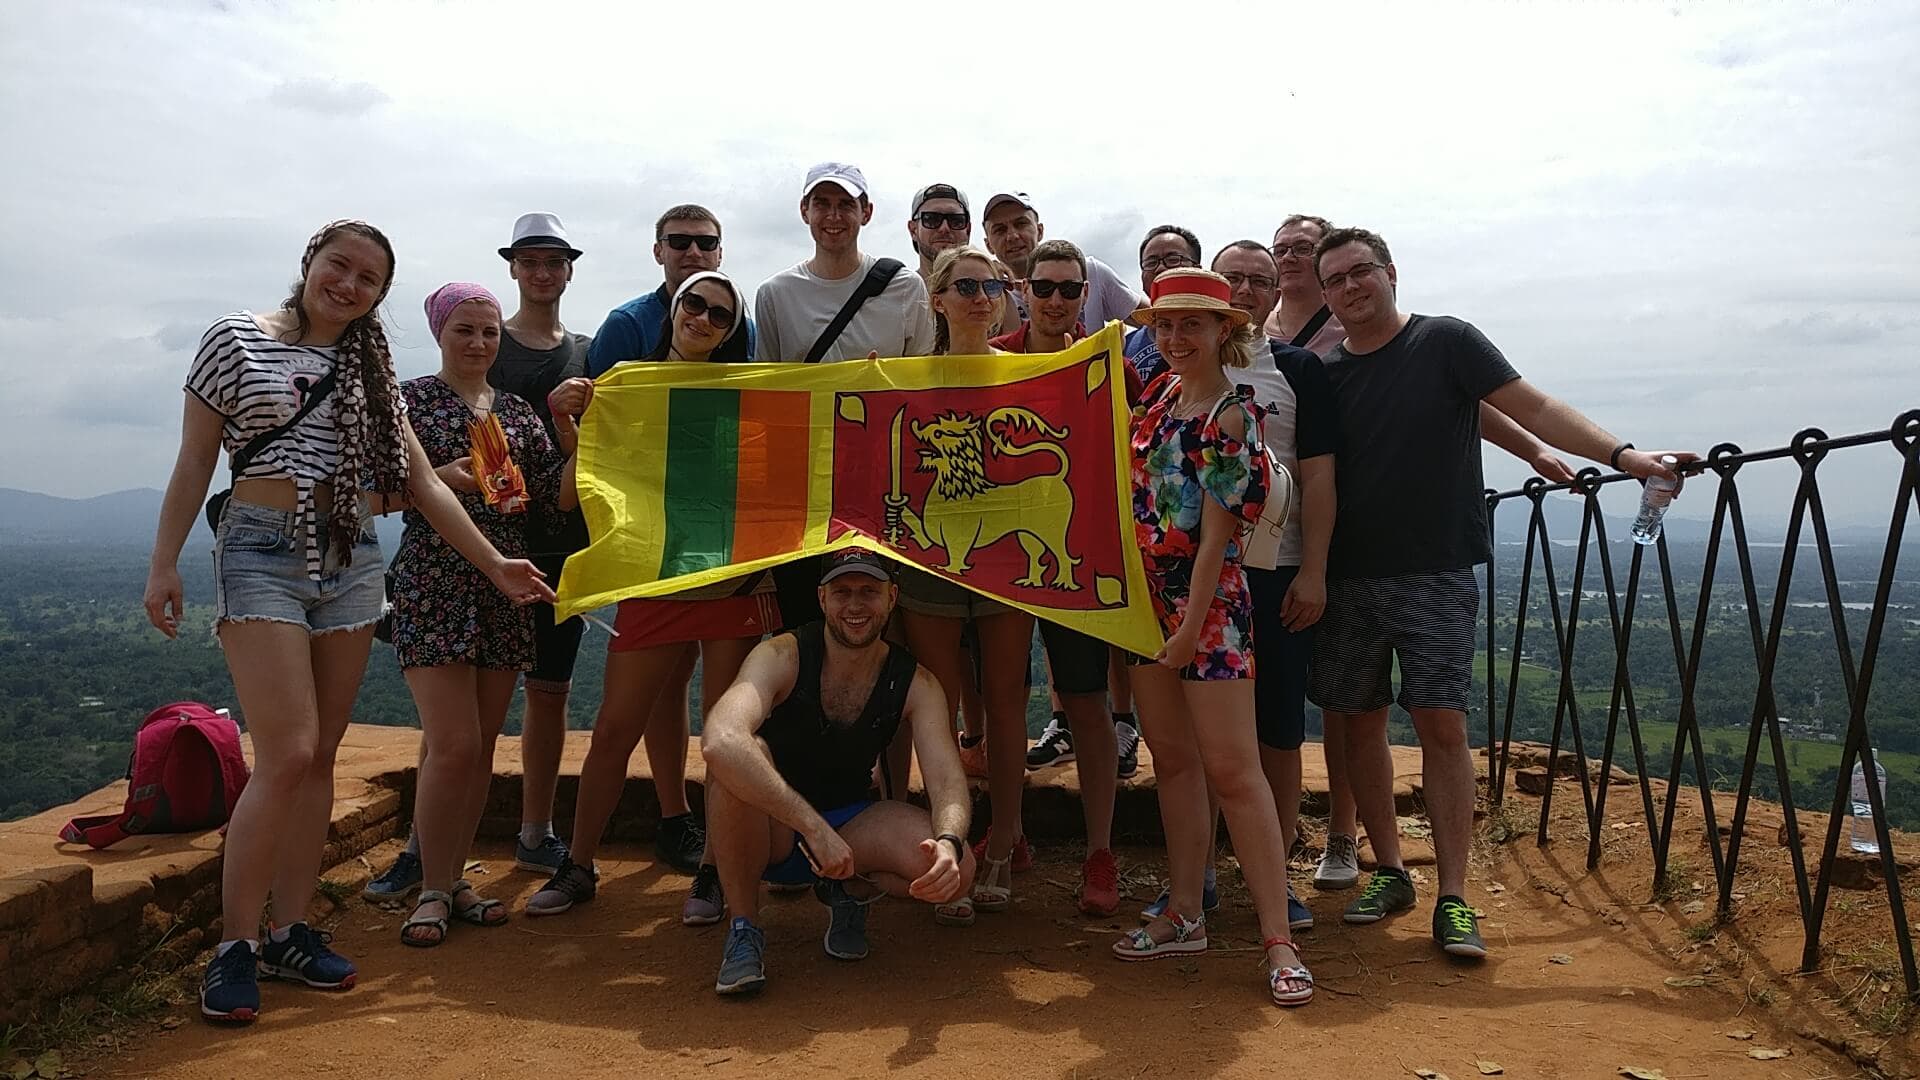 A group of people holding the Sri Lankan flag while participating on incentive activities.